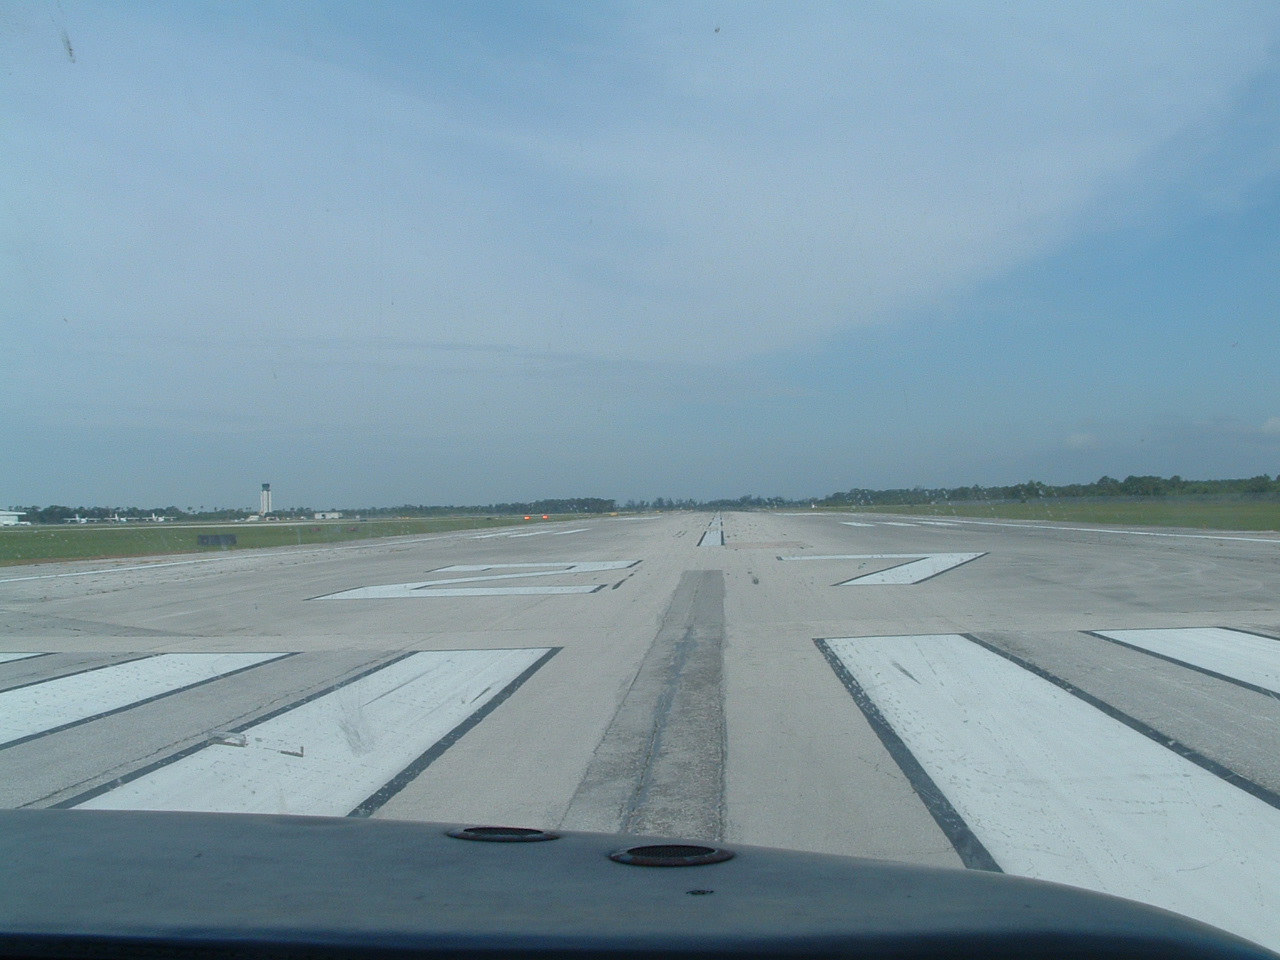 Lined up on Runway 27.